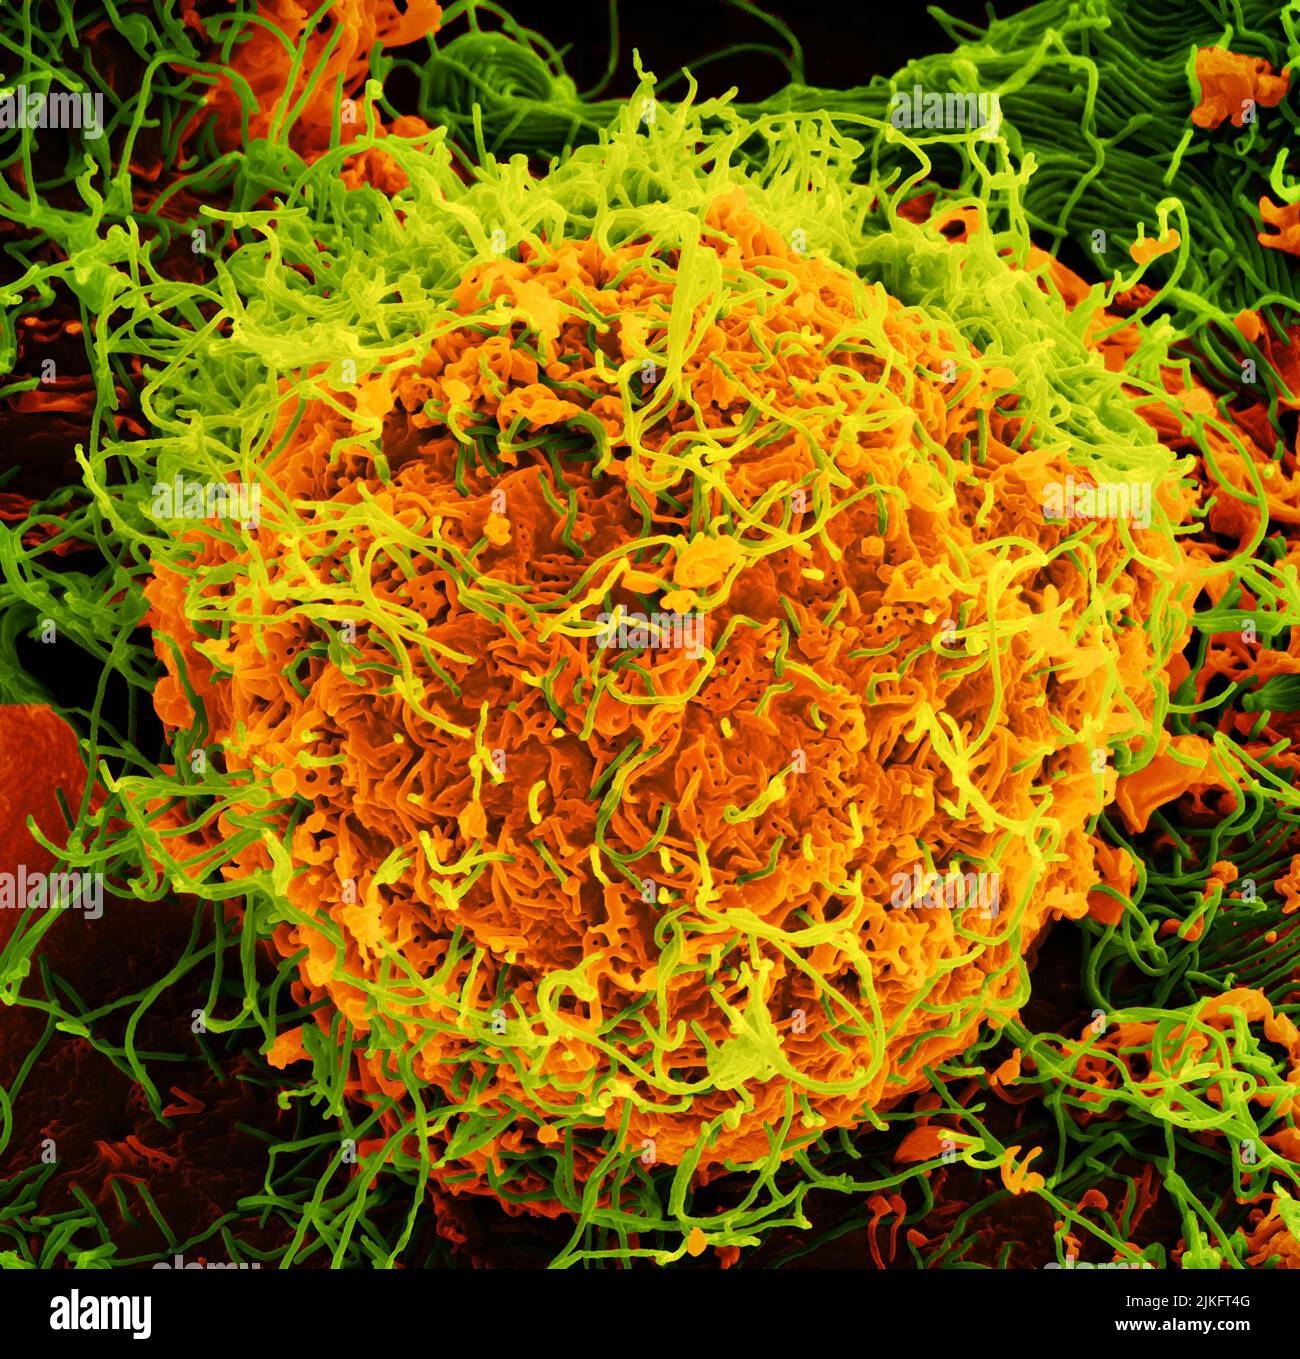 Scanning electron micrograph of Ebola virus particles (green) budding and attached to the surface of infected VERO E6 cells (orange). Focused image at the NIAID Integrated Research Center in Fort Detrick, Maryland. Credit: NIAID Stock Photo